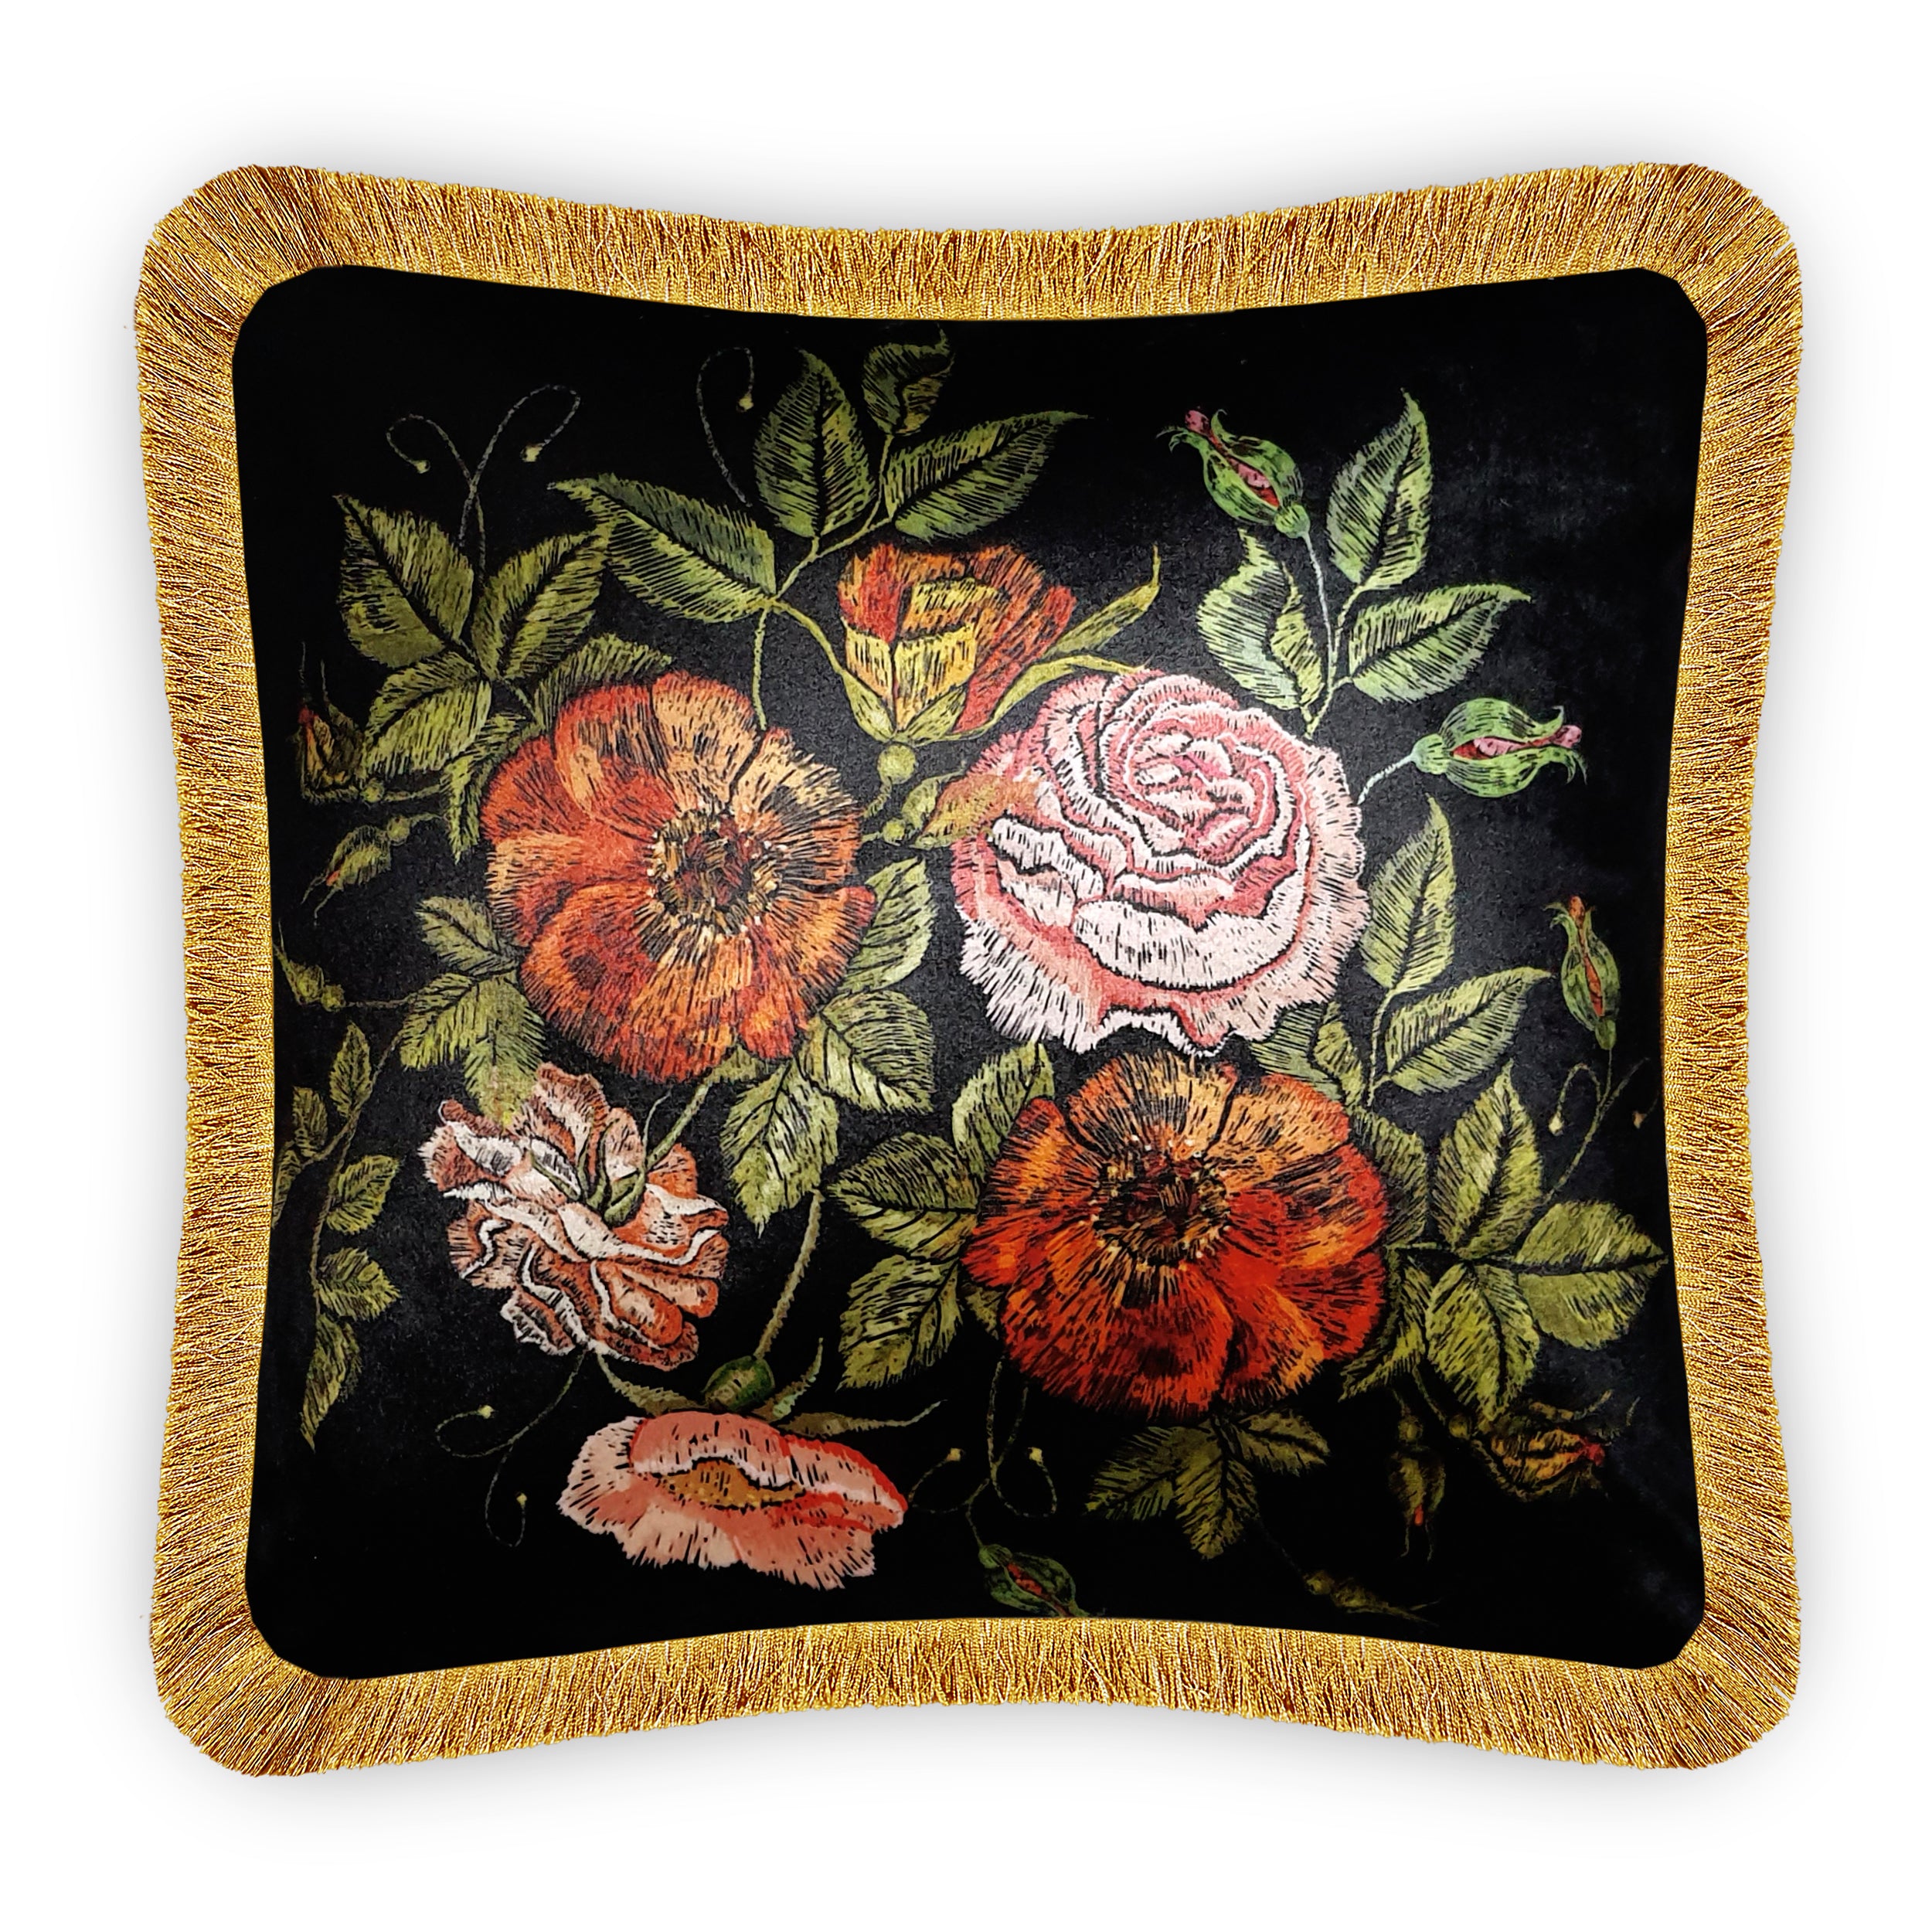 Velvet Cushion Cover Abstract Rose Bouquet Embroidery Decorative Pillow  Modern Home Decor Throw Pillow for Sofa Chair Living Room 45x45 cm 18x18 In